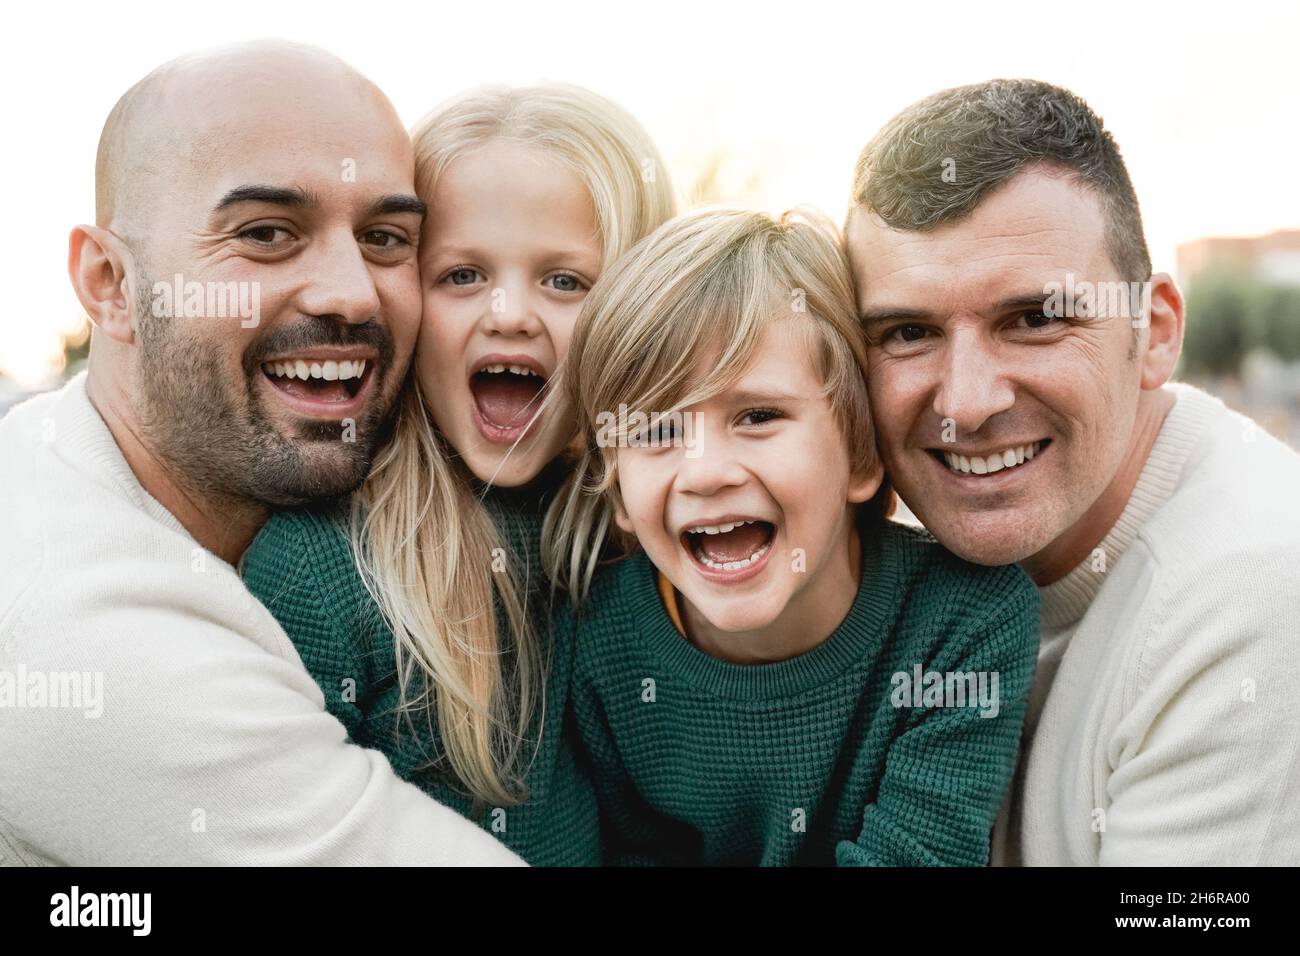 LGBT family outdoor - Happy gay men couple and sons having fun together at city park - Focus on center kid face Stock Photo